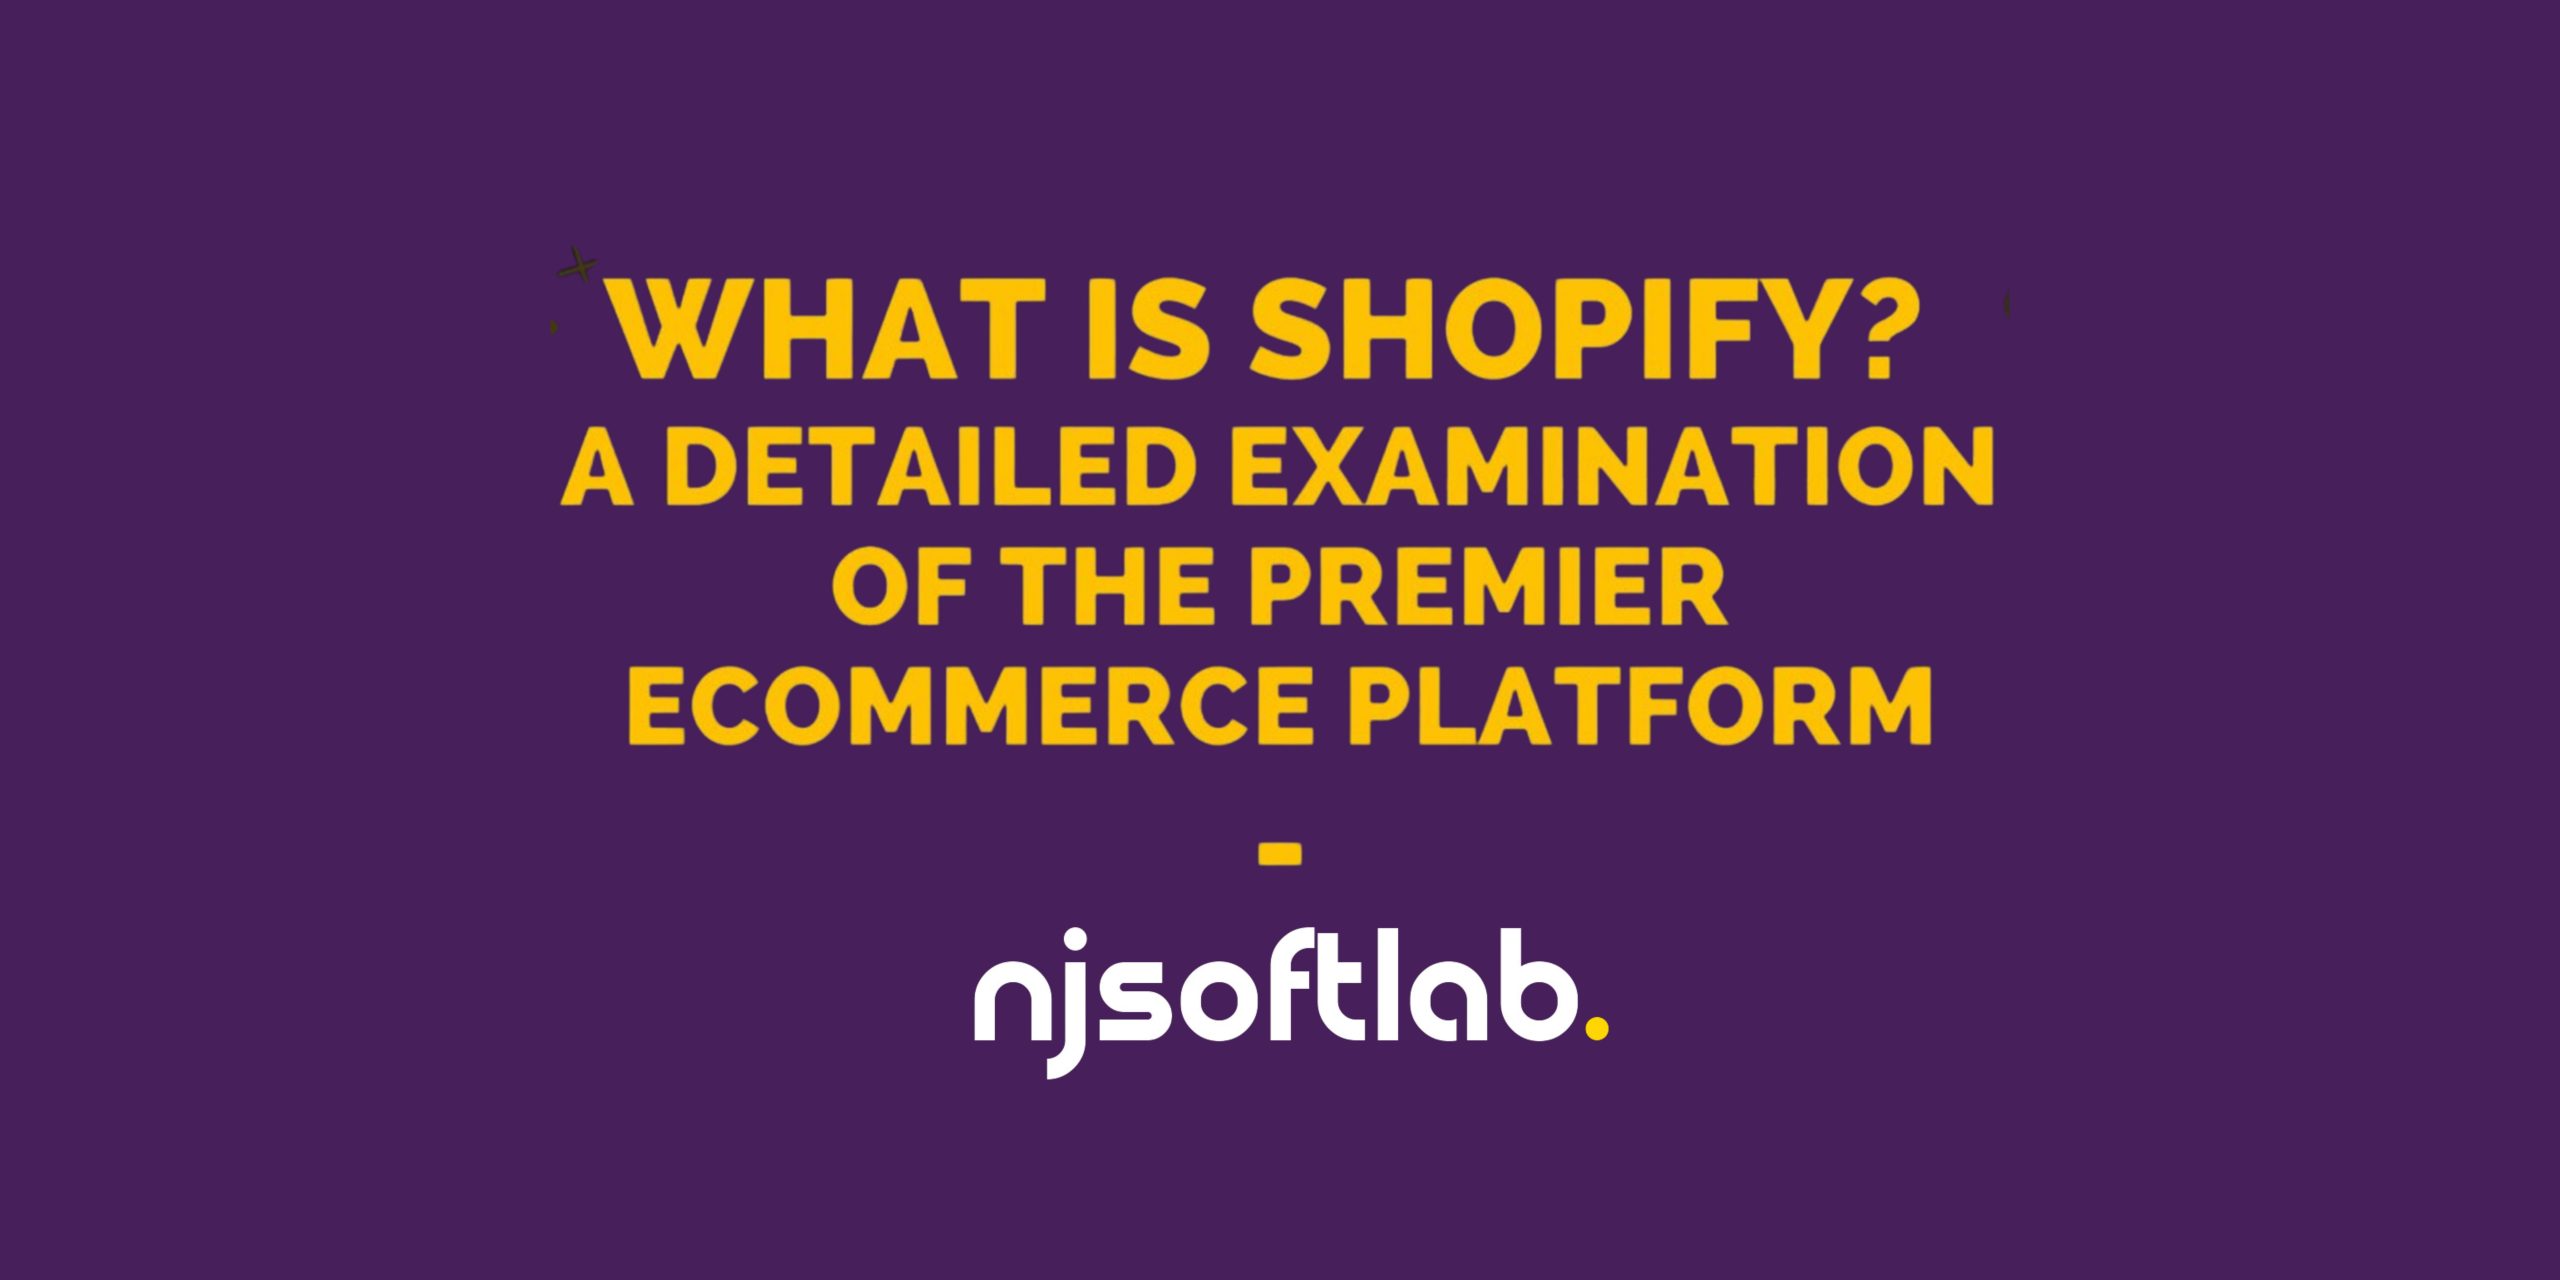 What Is Shopify? A Detailed Examination of the Premier Ecommerce Platform